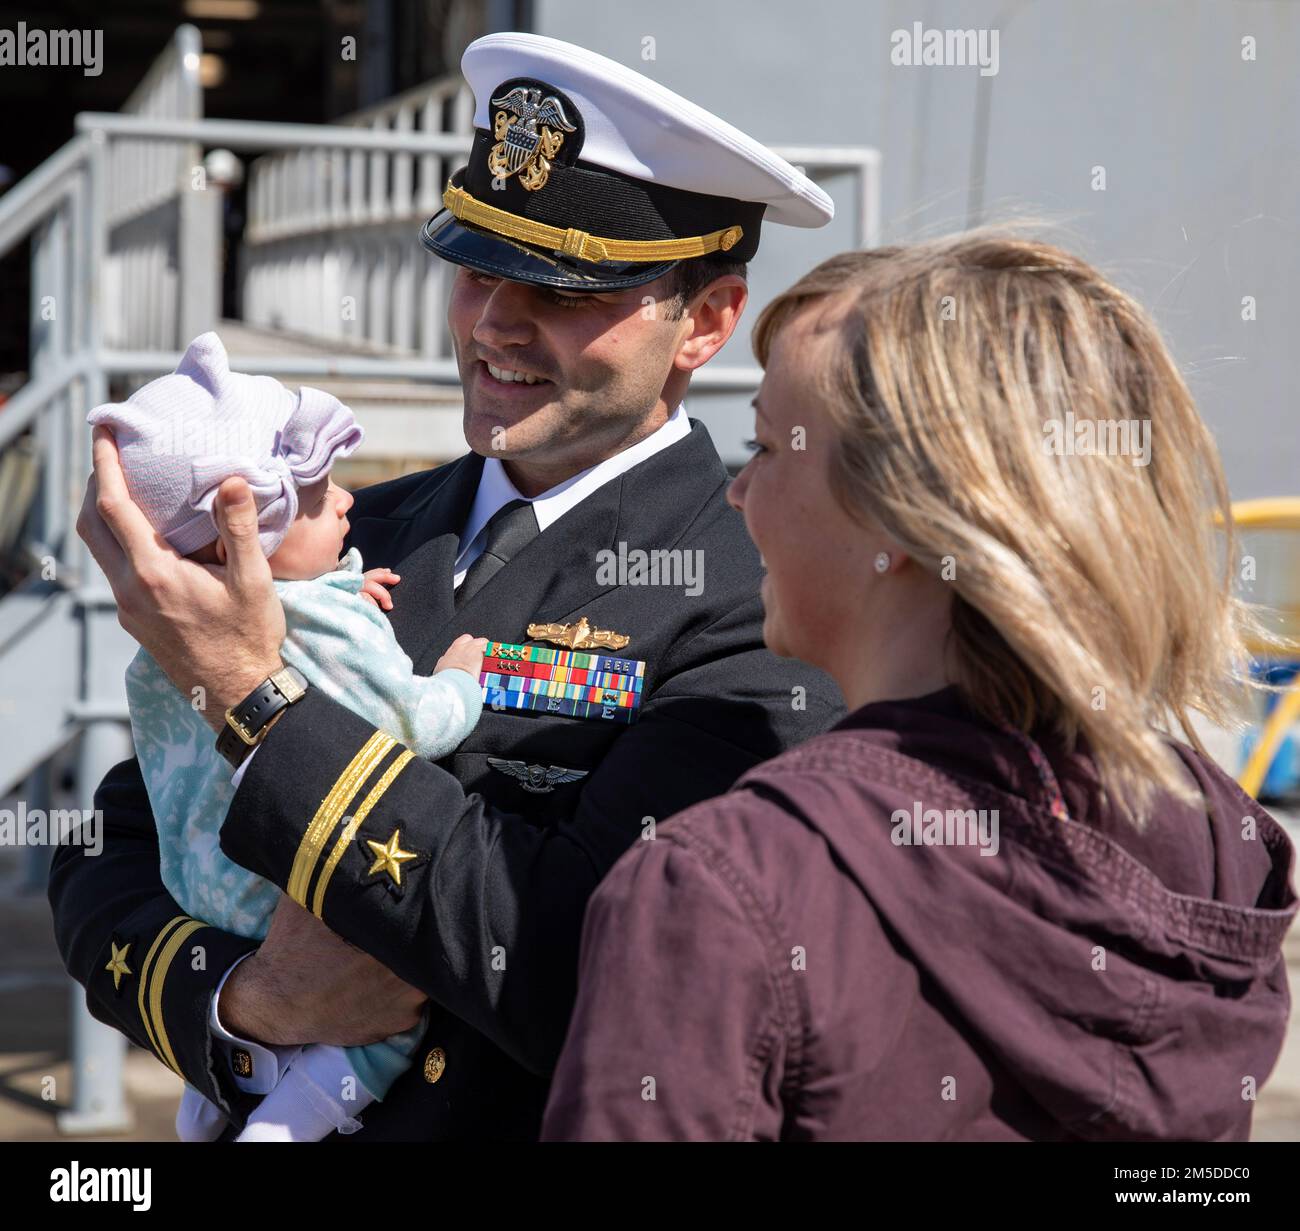 220304-N-LR905-2172  SAN DIEGO (March 4, 2022) – Lt. j.g. Knight, currently assigned to amphibious transport dock ship USS Portland (LPD 27), embraces his child for the first time March 4. Portland, a part of the Essex Amphibious Ready Group, returned to Naval Base San Diego March 4 after a deployment to U.S. 3rd, 5th, and 7th Fleets in support of regional stability and a free and open Indo-Pacific. Stock Photo